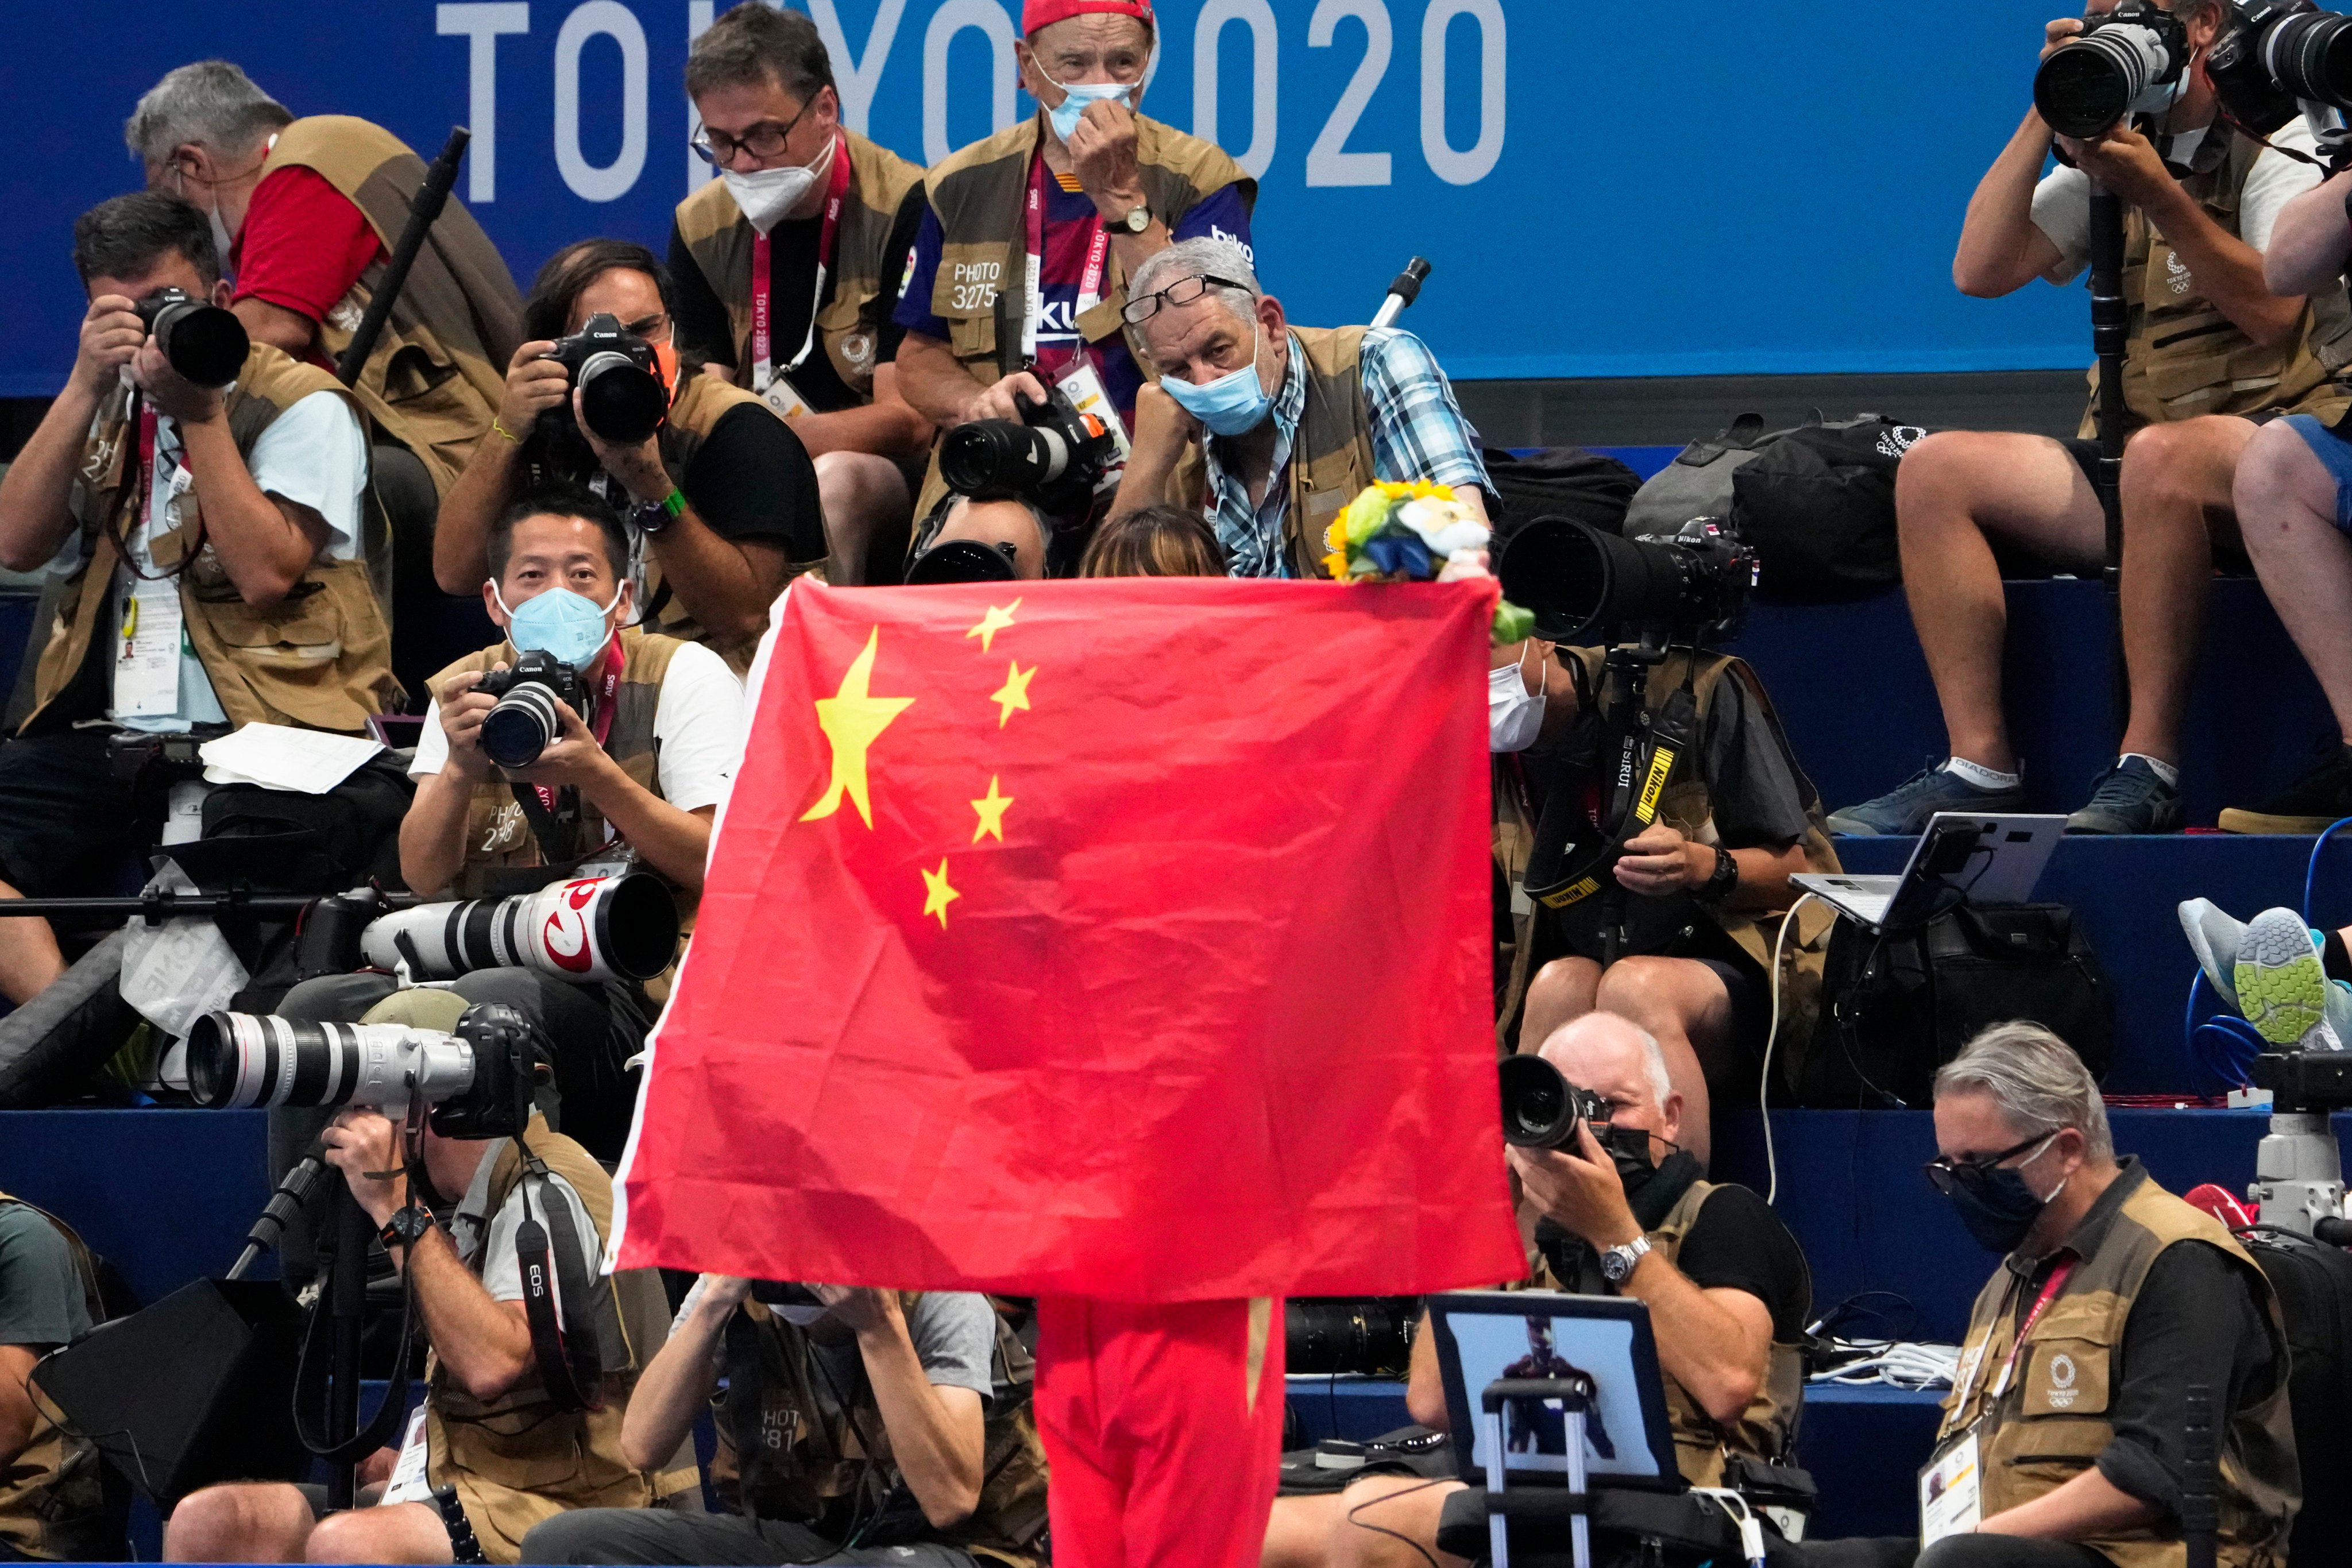 A Chinese flag is unfurled on the podium of a swimming event at the Tokyo Olympics. Photo: AP